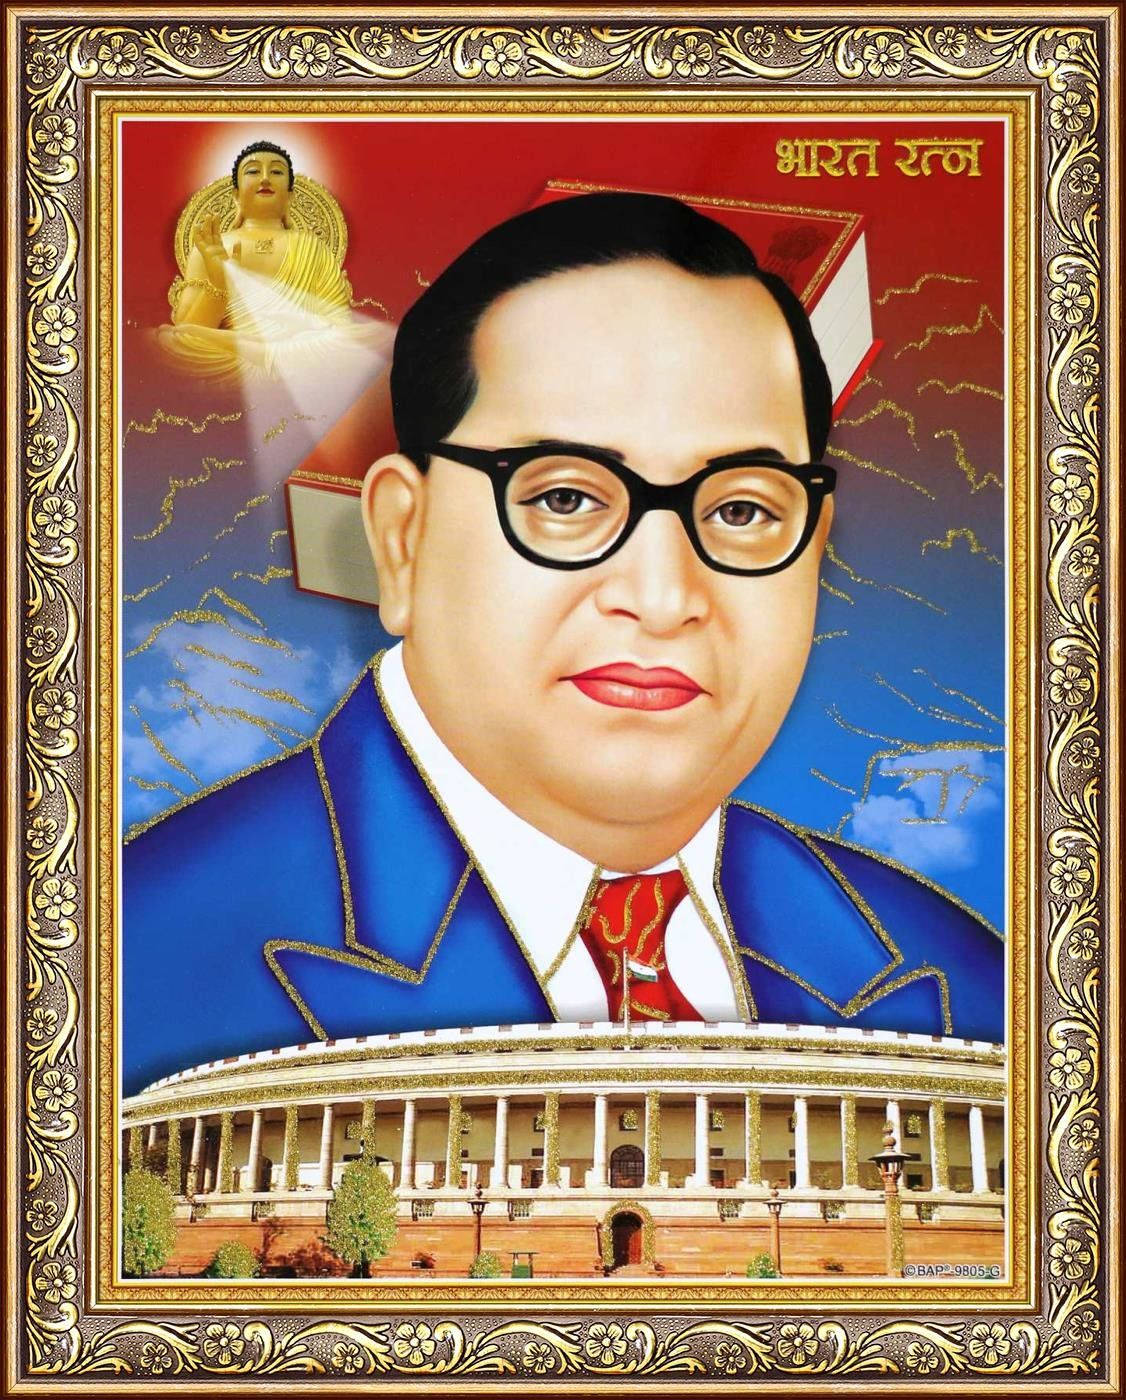 Majestic View Of Dr. Babasaheb Ambedkar Image Above Building Wallpaper